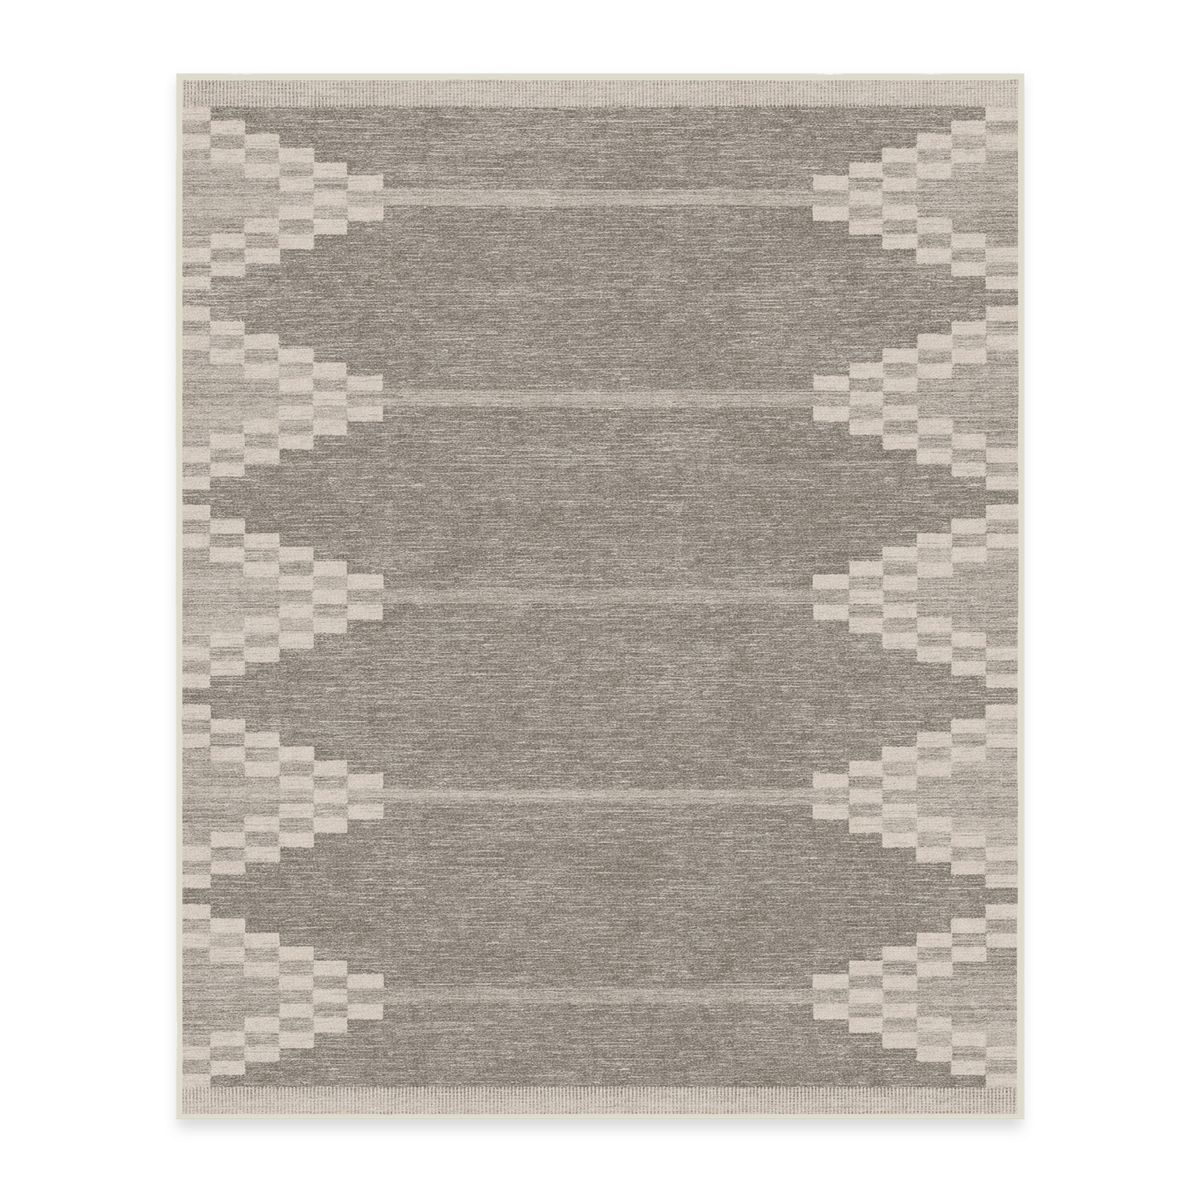 Ruggable Sloane Washable Contemporary Area Rug | Target